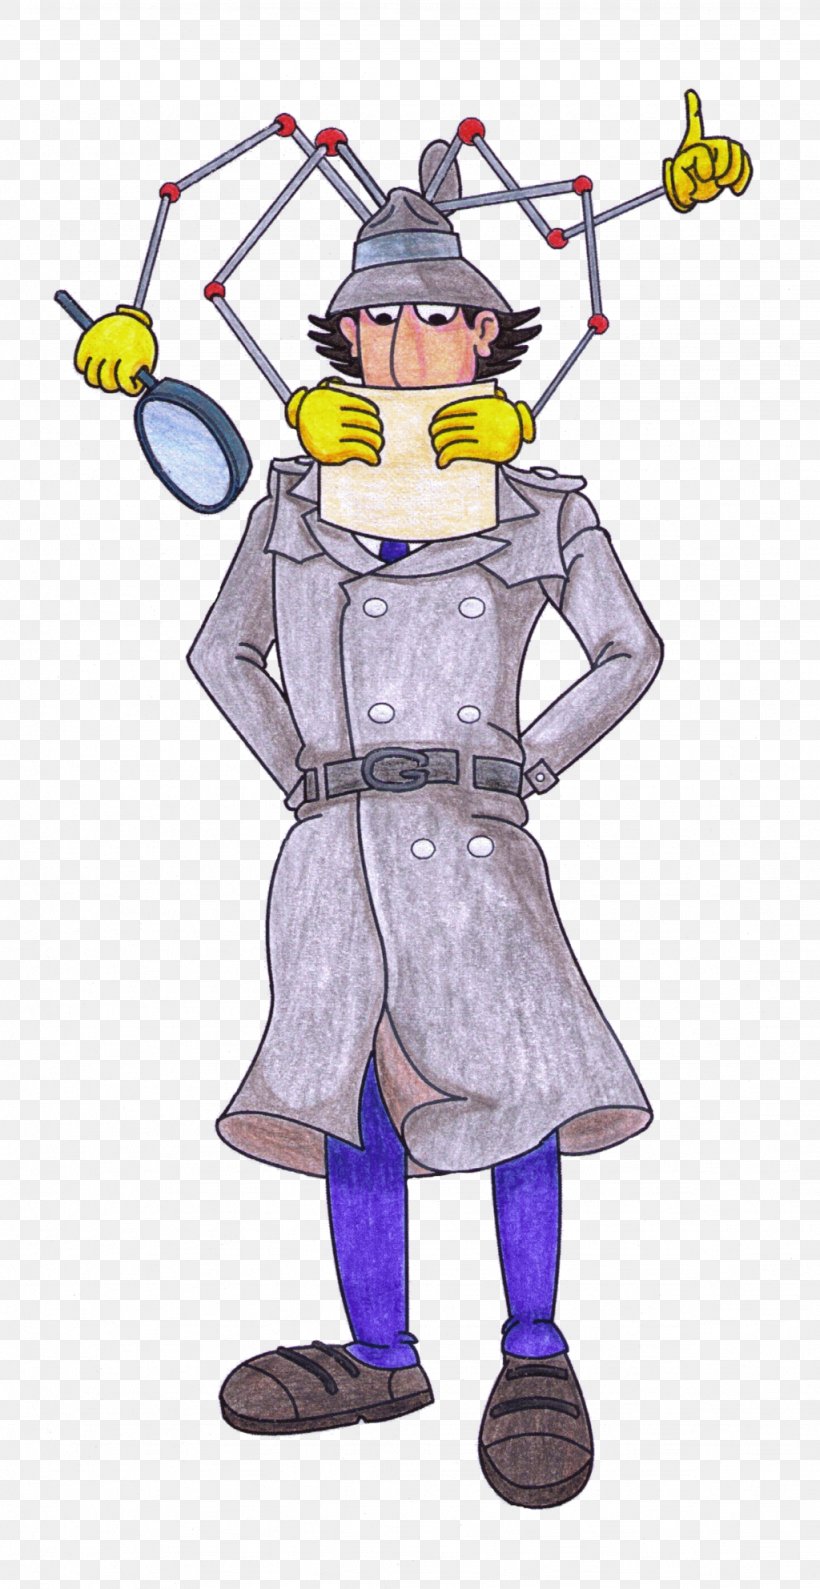 Inspector Gadget Cartoon Free Comic Book Day Animation, PNG ...